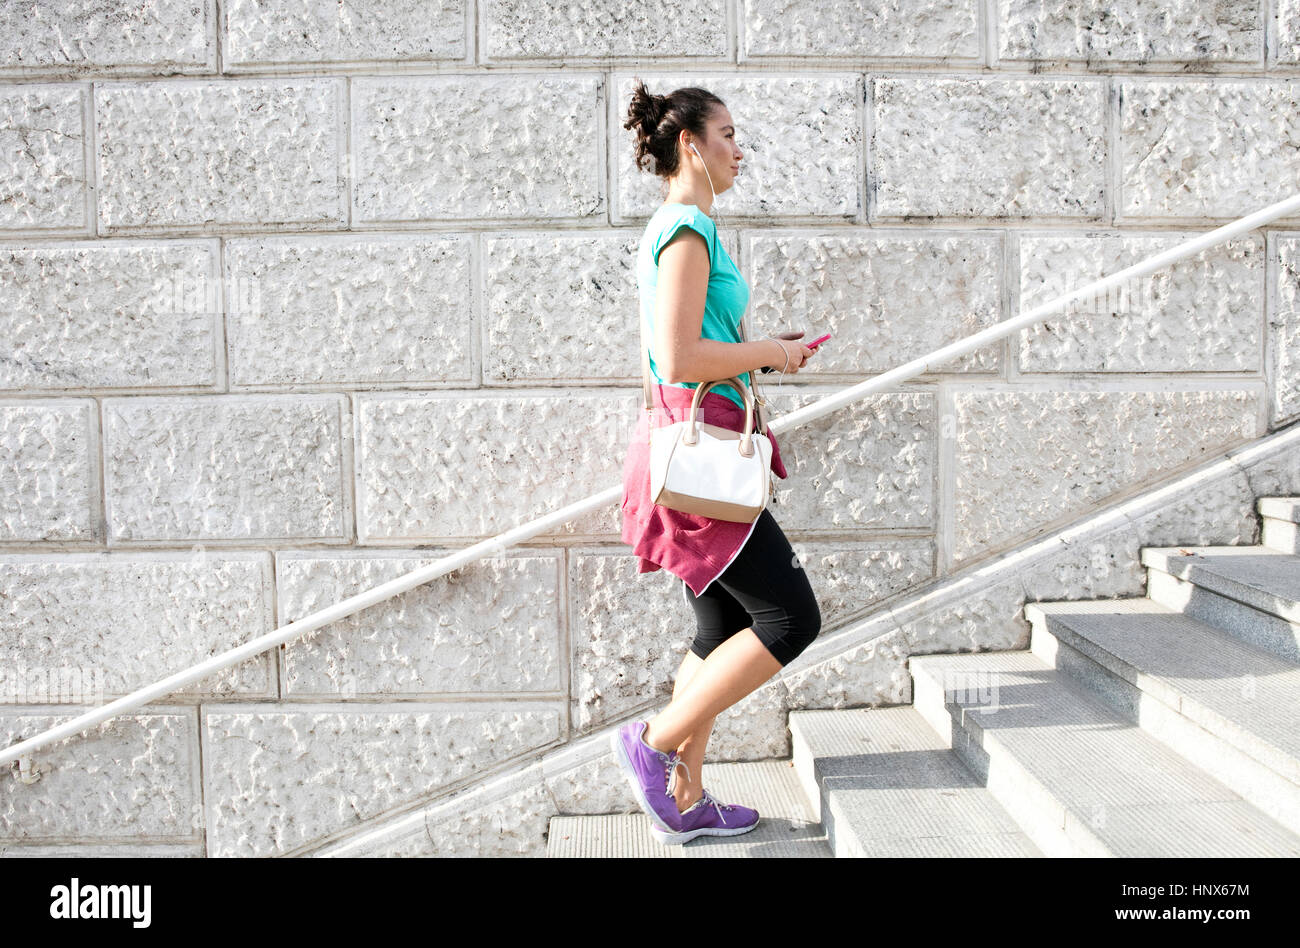 Young woman wearing sports clothing and earphones, walking up steps Stock Photo